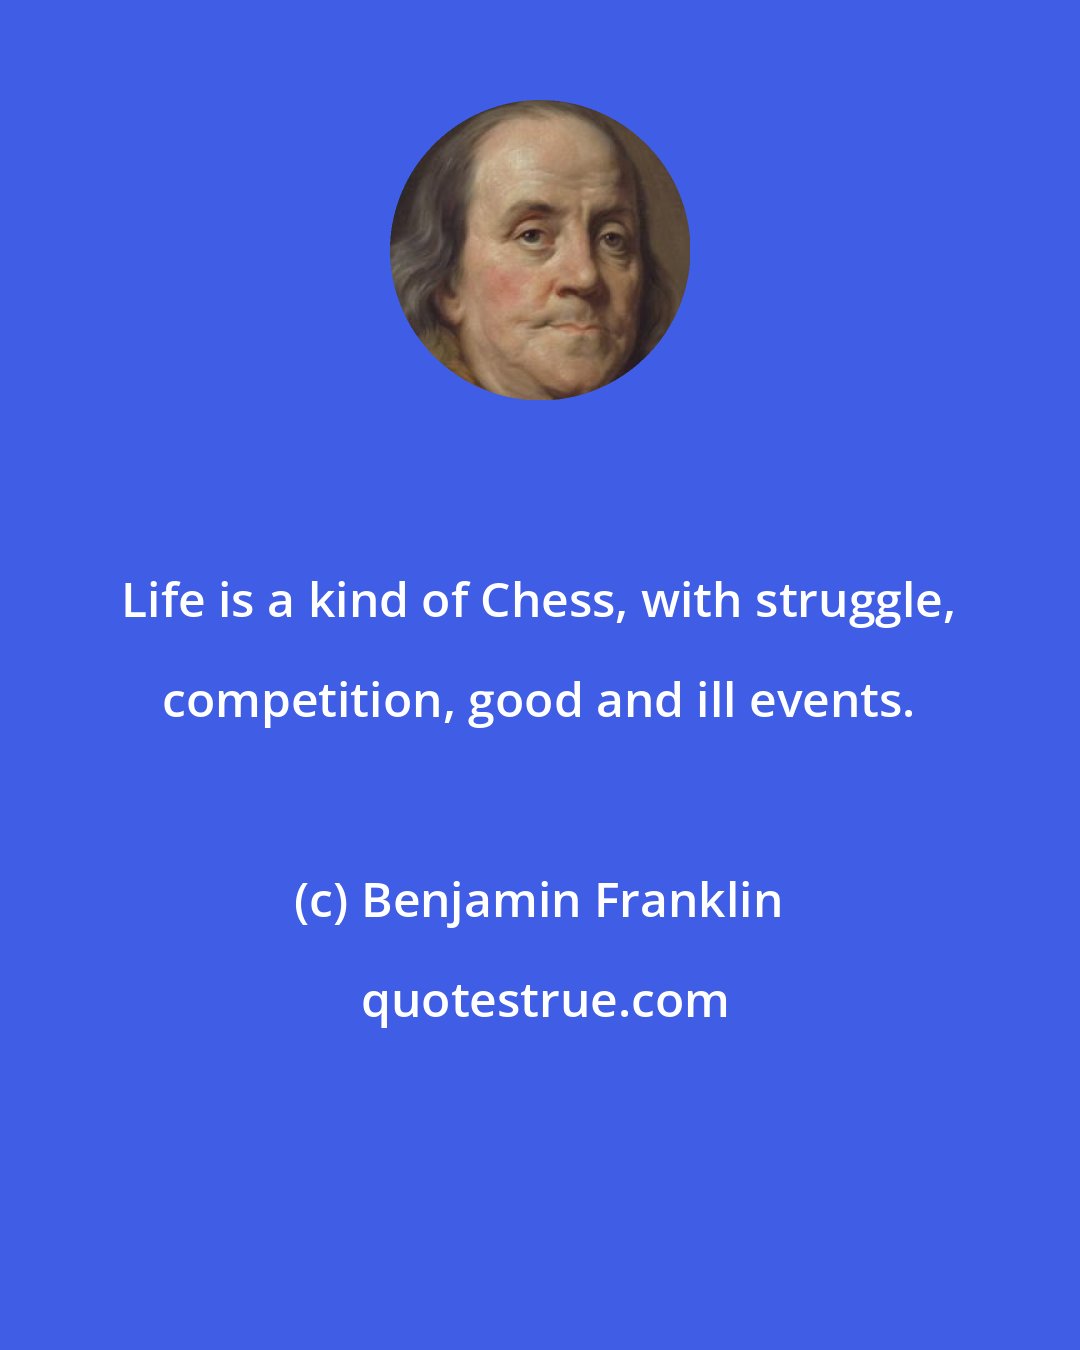 Benjamin Franklin: Life is a kind of Chess, with struggle, competition, good and ill events.